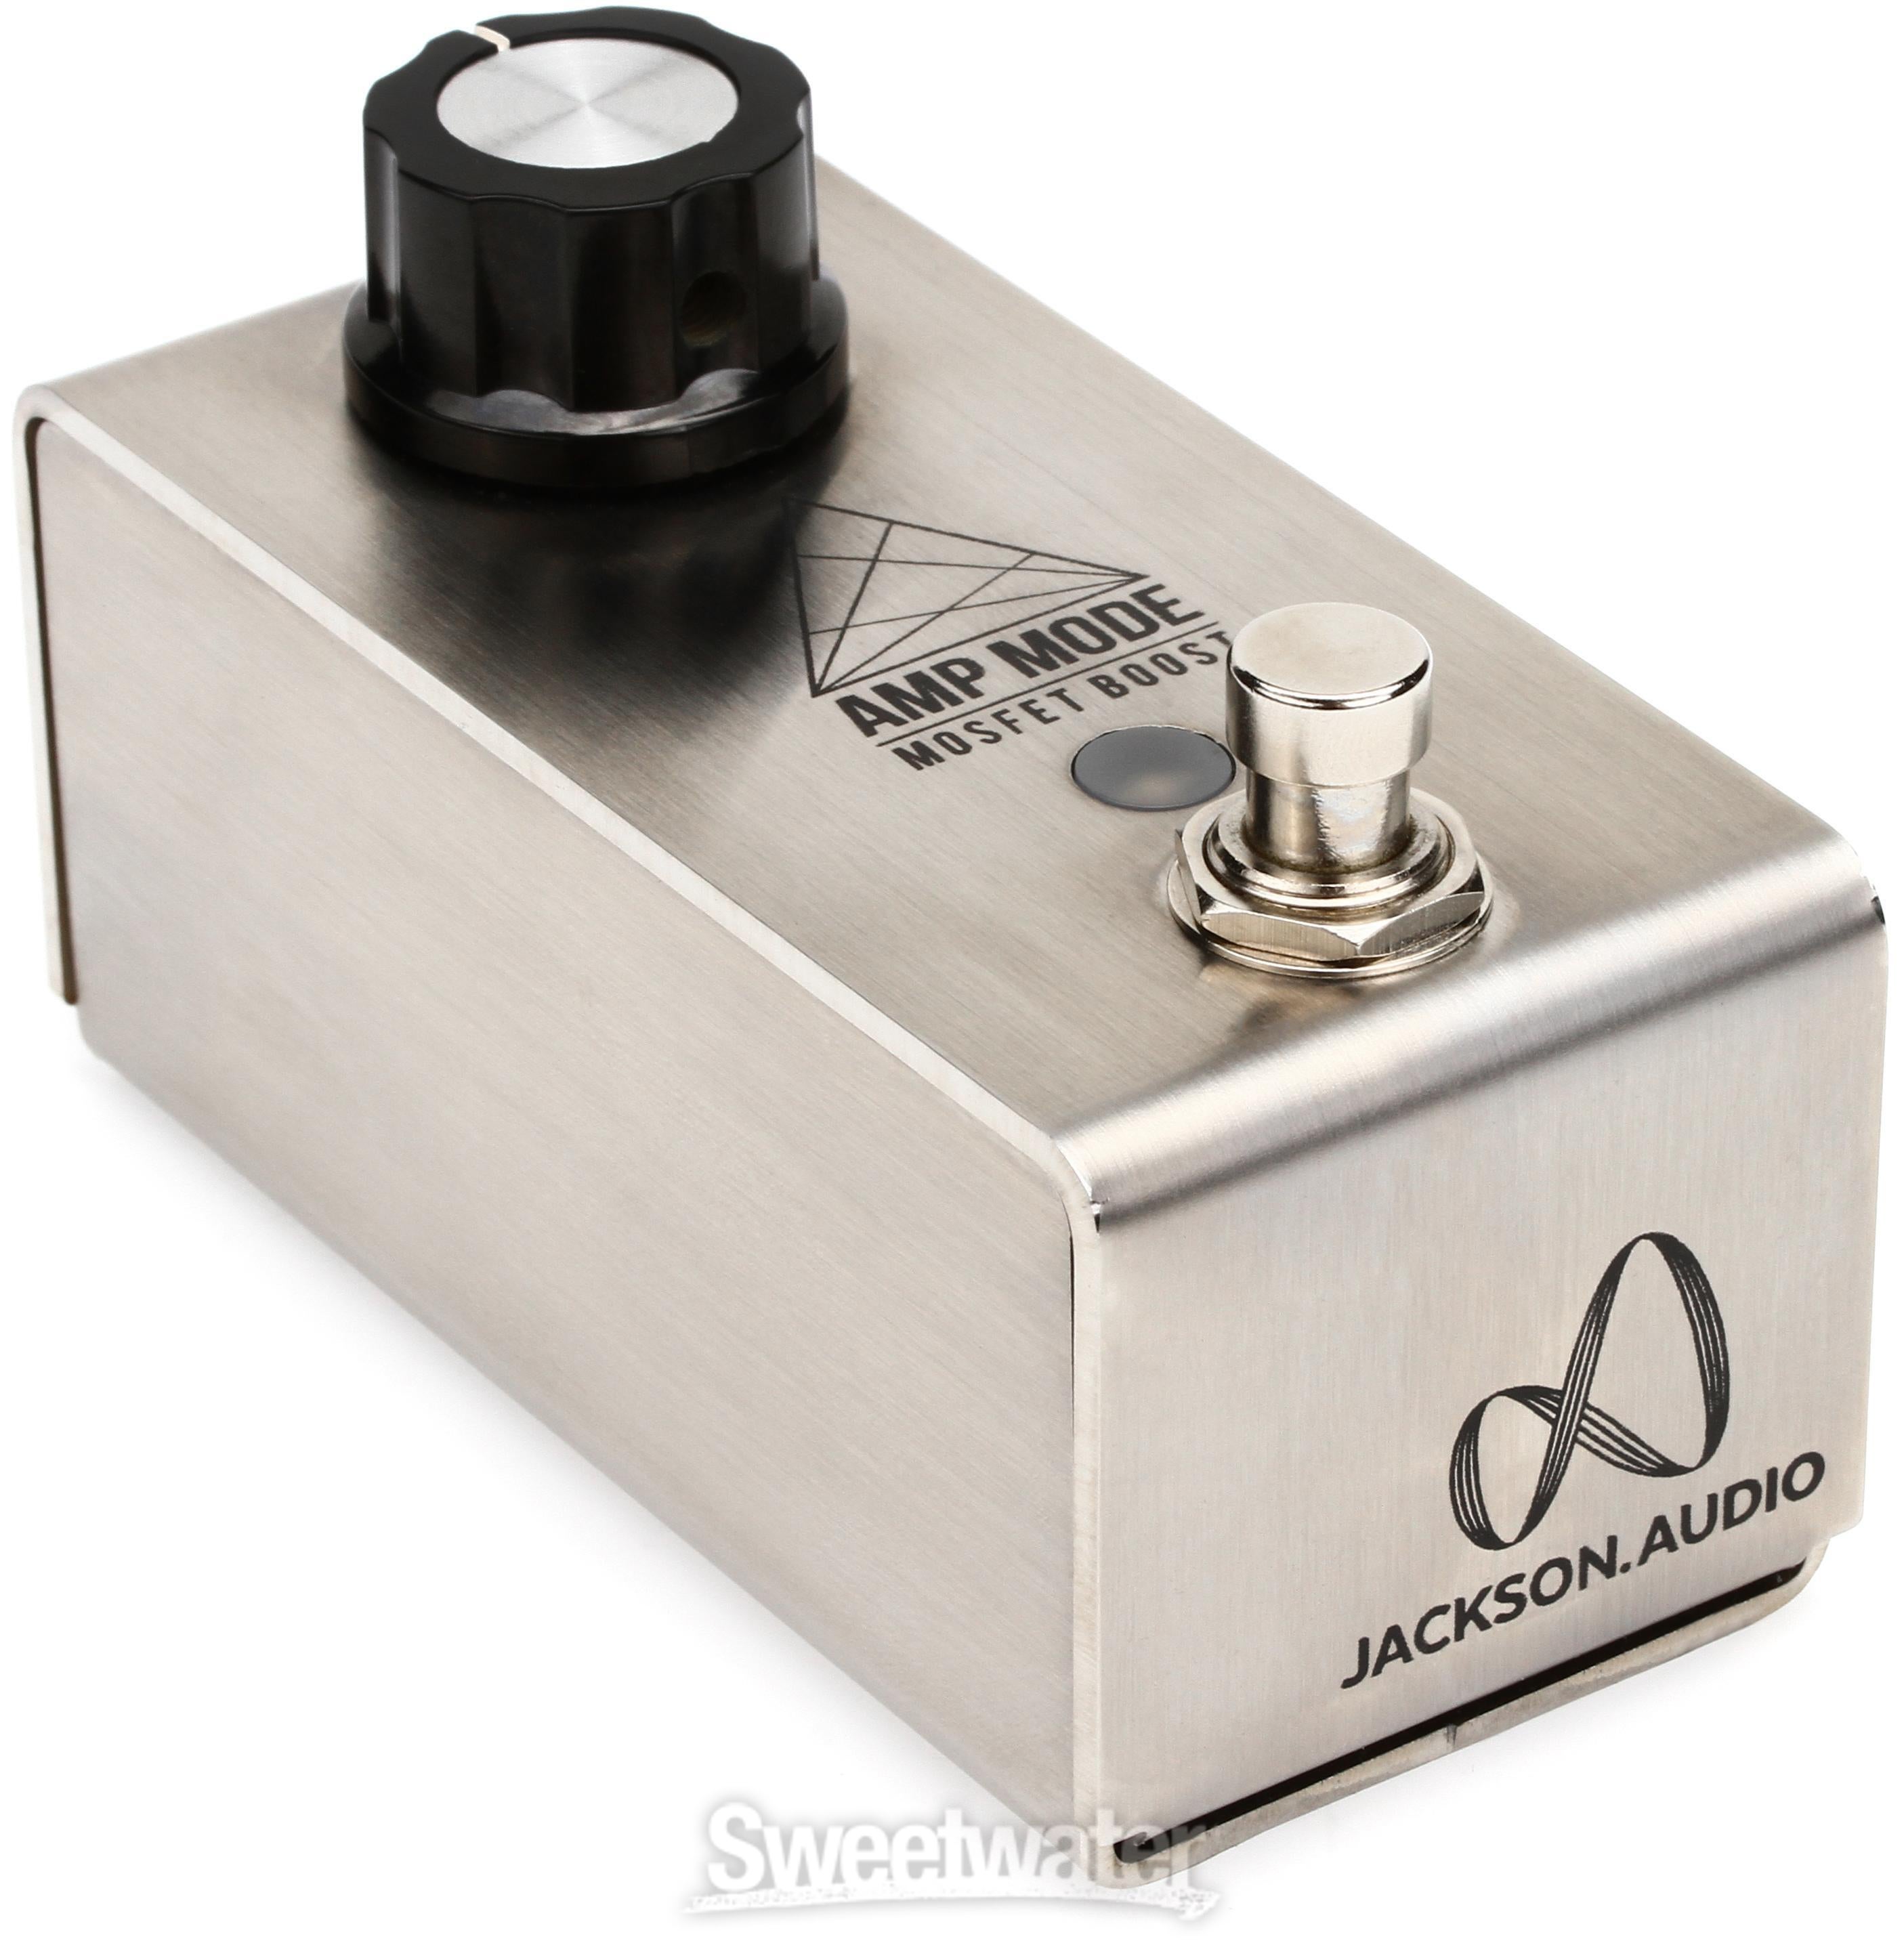 Jackson Audio Amp Mode Boost Pedal - Stainless Steel | Sweetwater